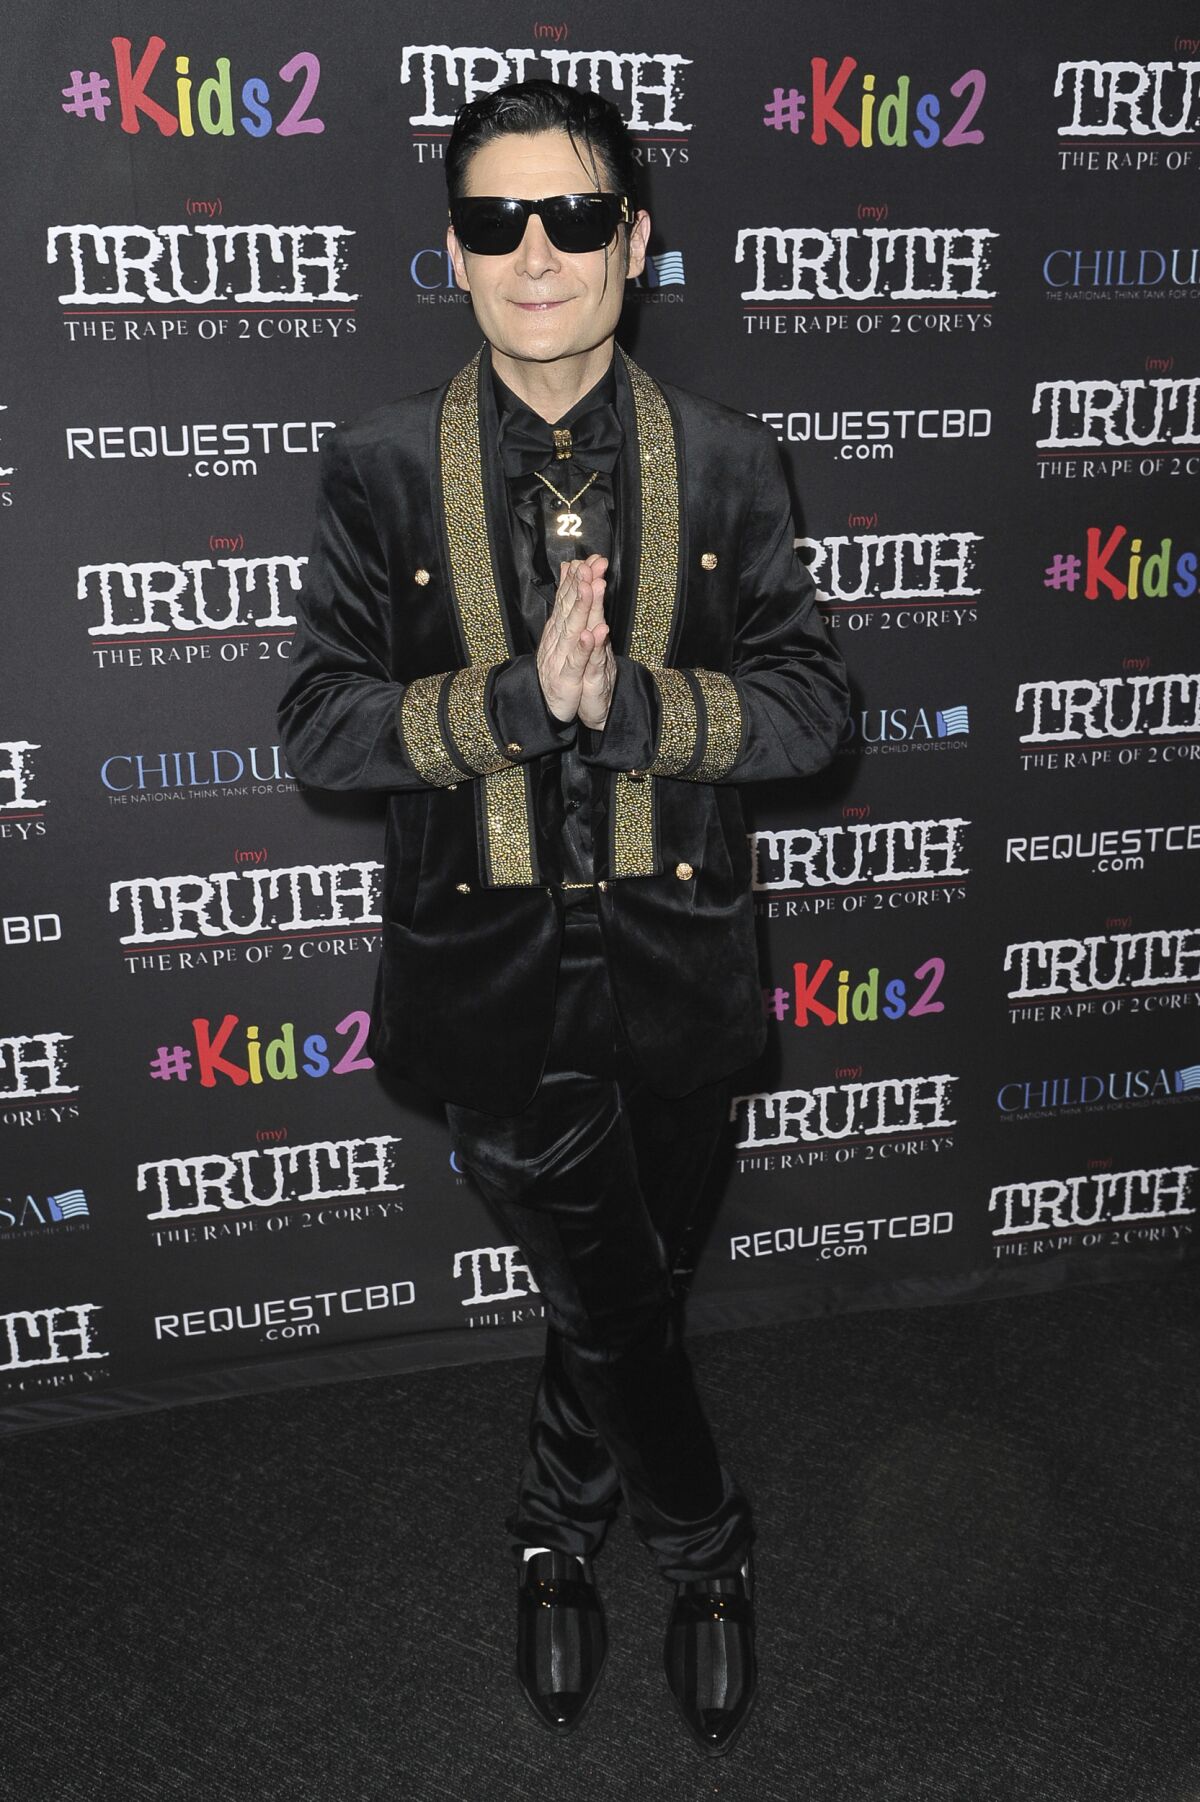 Corey Feldman attends the L.A. premiere of "My Truth: The Rape of 2 Coreys" at the Directors Guild of America on Monday, March 9, 2020, in Los Angeles.